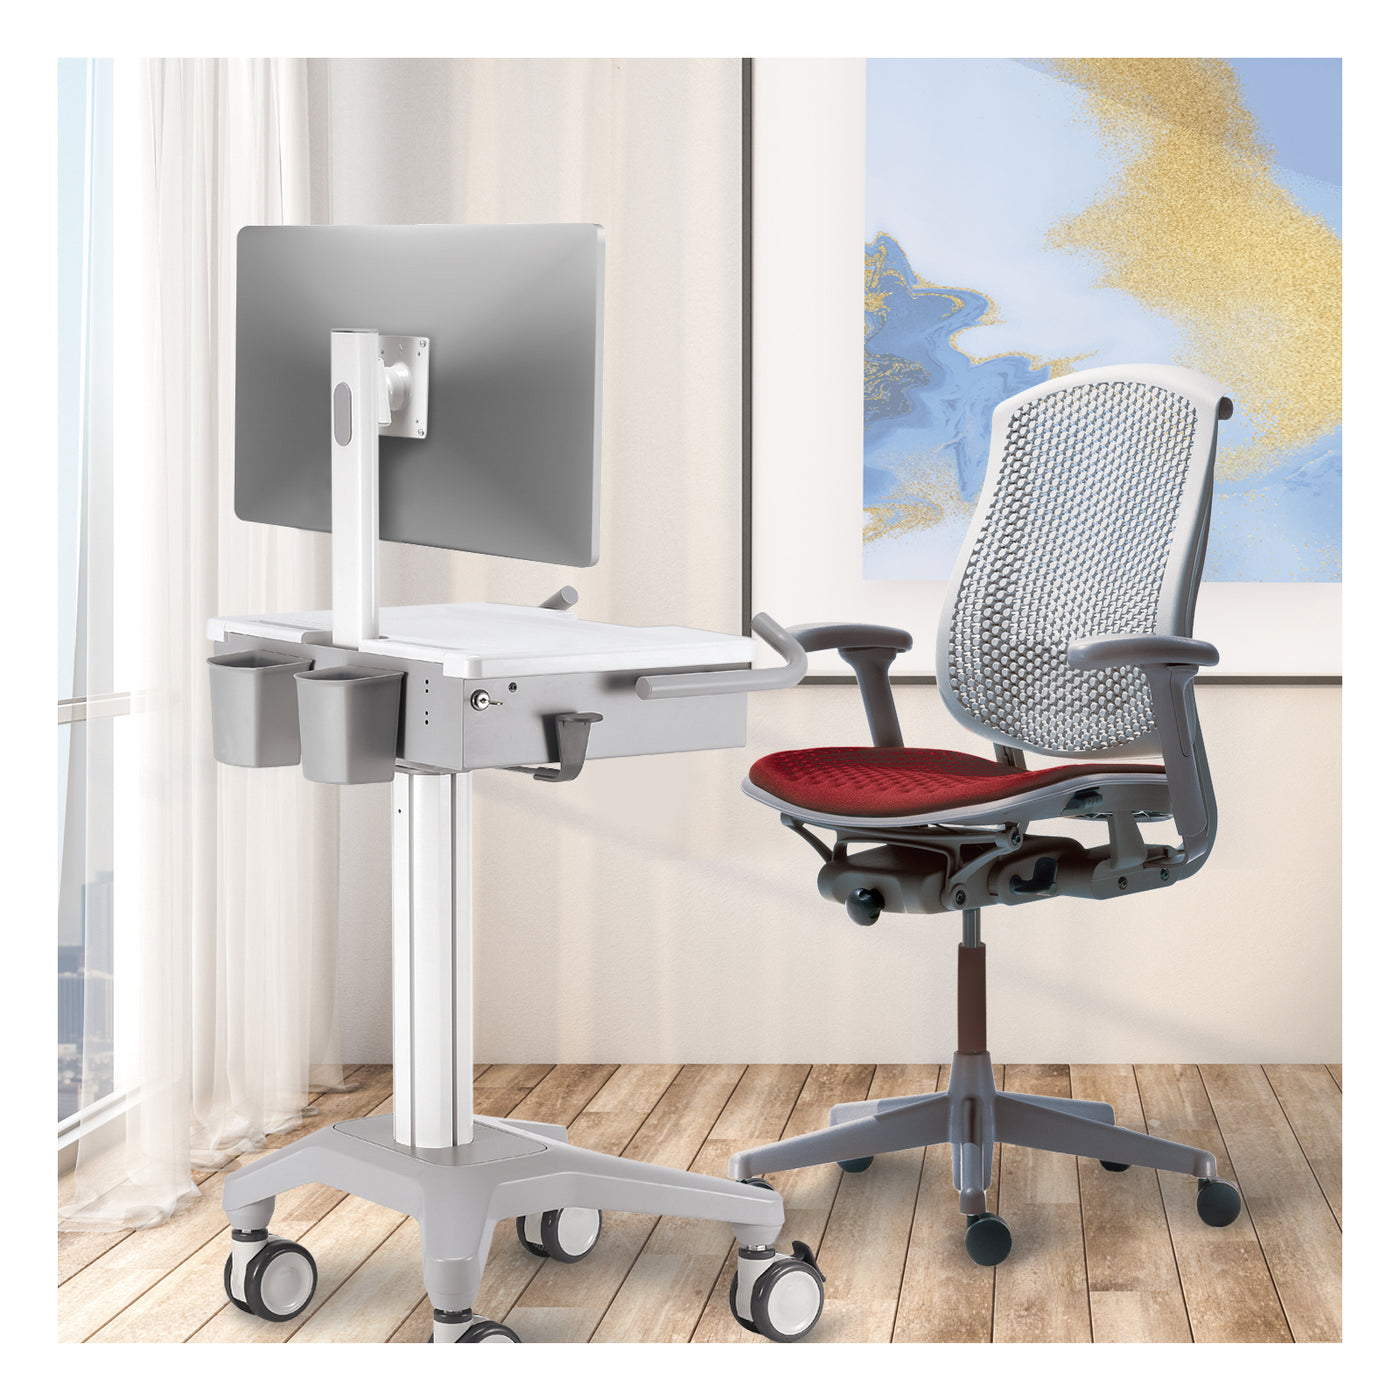 Mobile Workstation Adjustable Monitor Mount with Keyboard, Mouse Tray, Casters